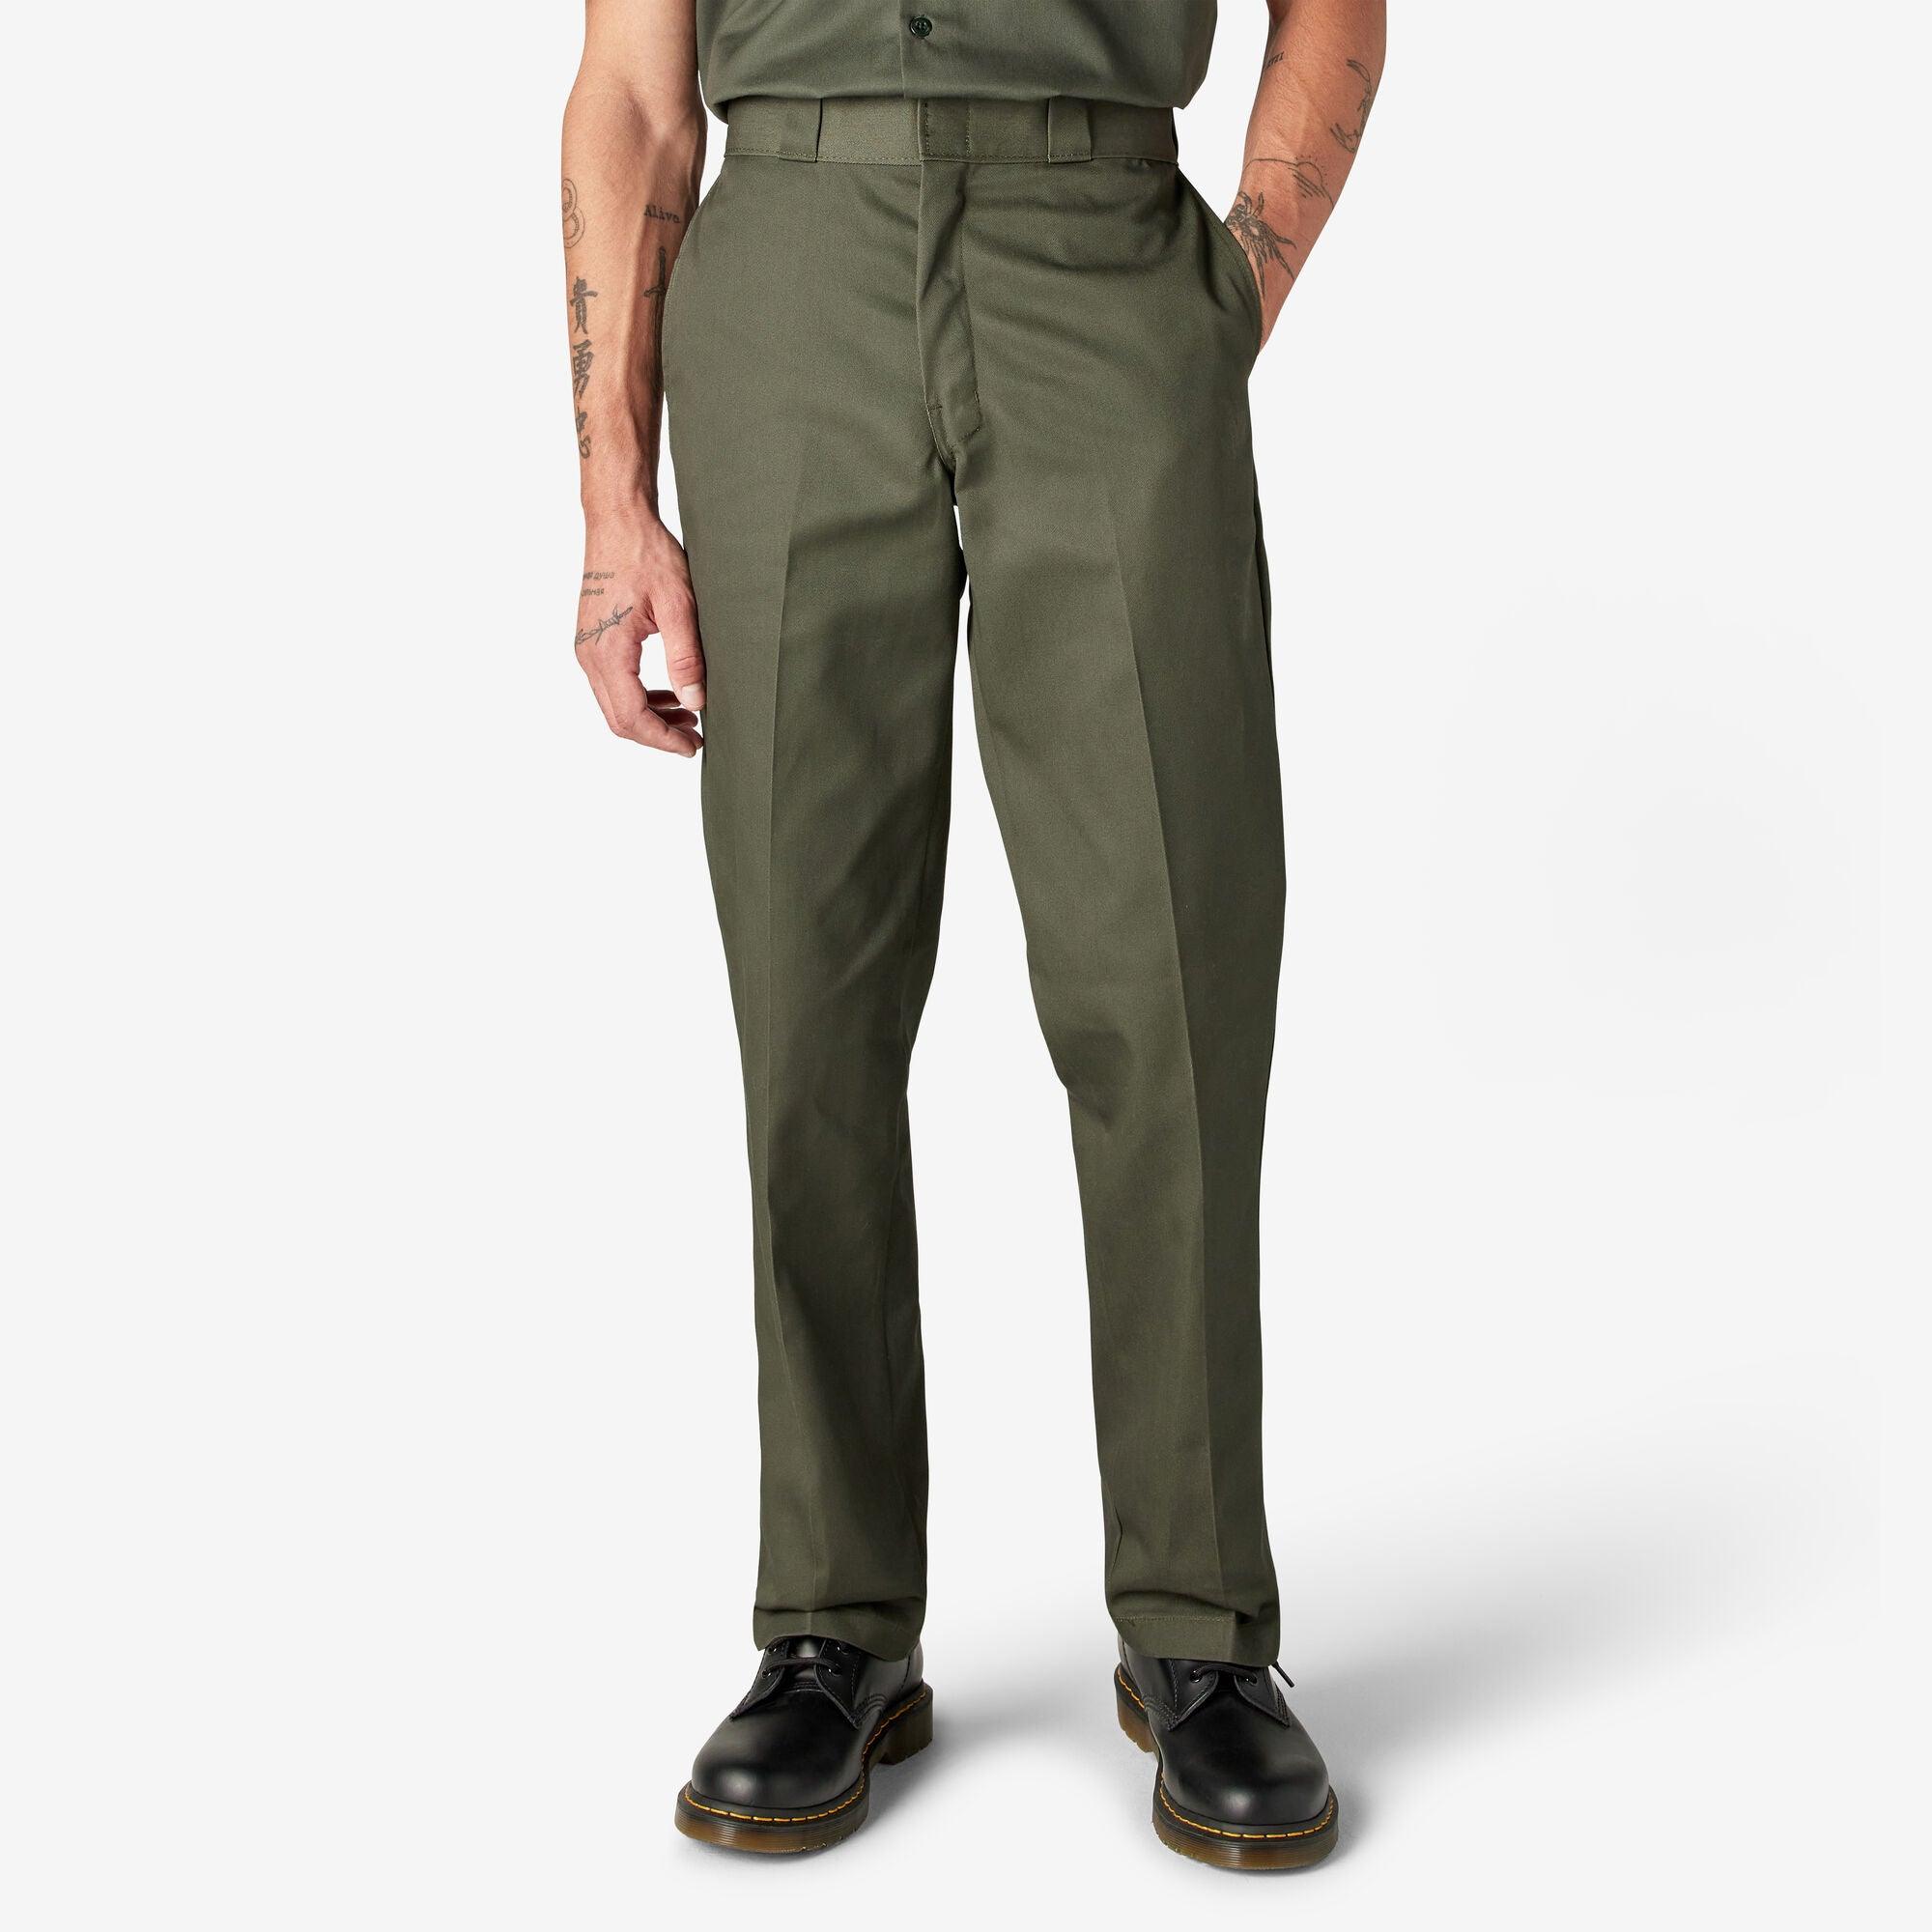 Original 874® Work Pants, Olive Green - Purpose-Built / Home of the Trades